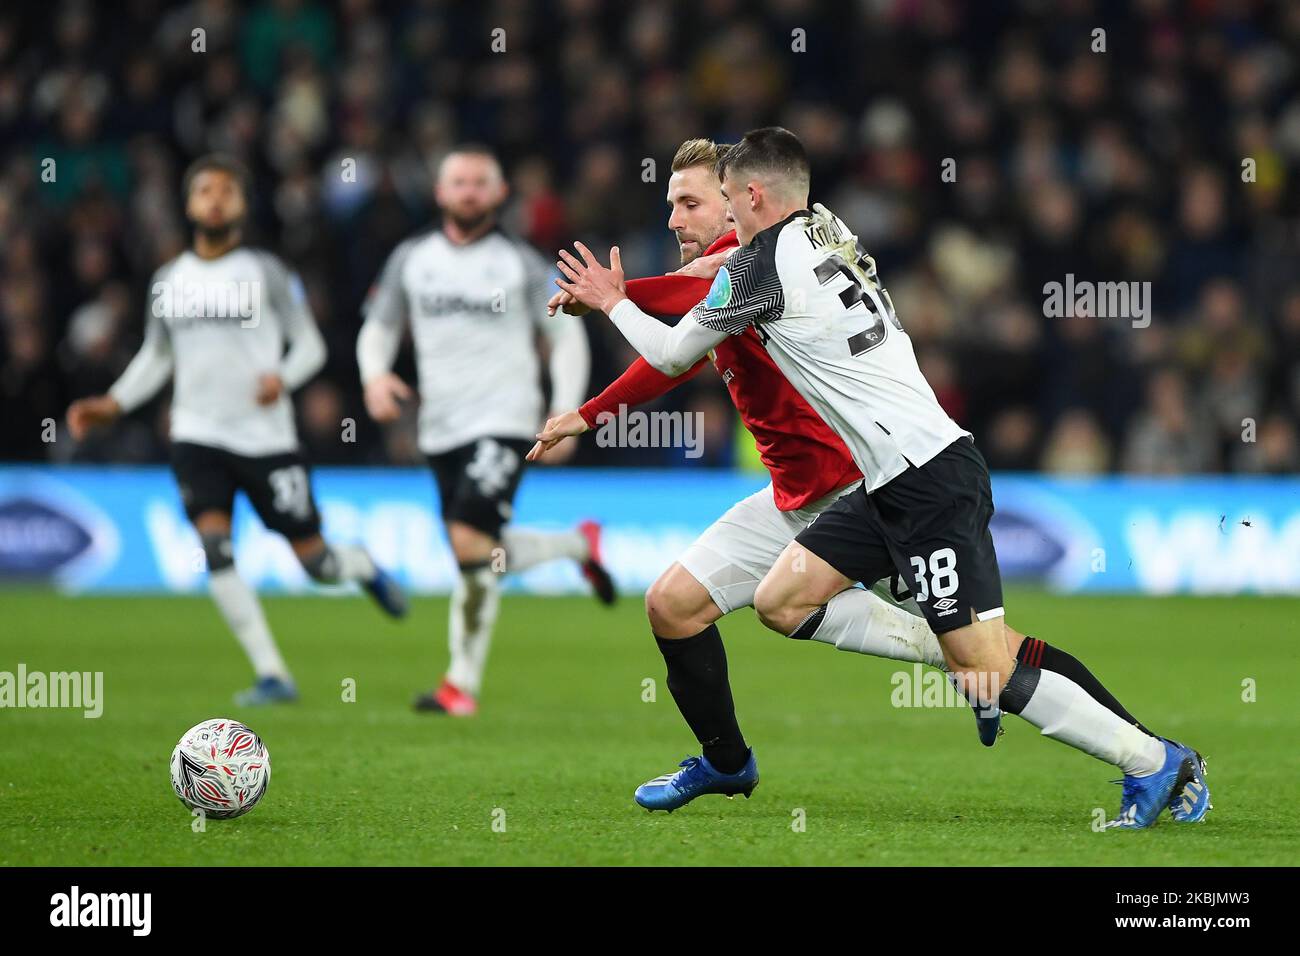 Jason Knight (38) of Derby County battles with Luke Shaw (23) of Manchester United during the FA Cup match between Derby County and Manchester United at the Pride Park, Derby on Thursday 5th March 2020. (Photo by Jon Hobley/MI News/NurPhoto) Stock Photo